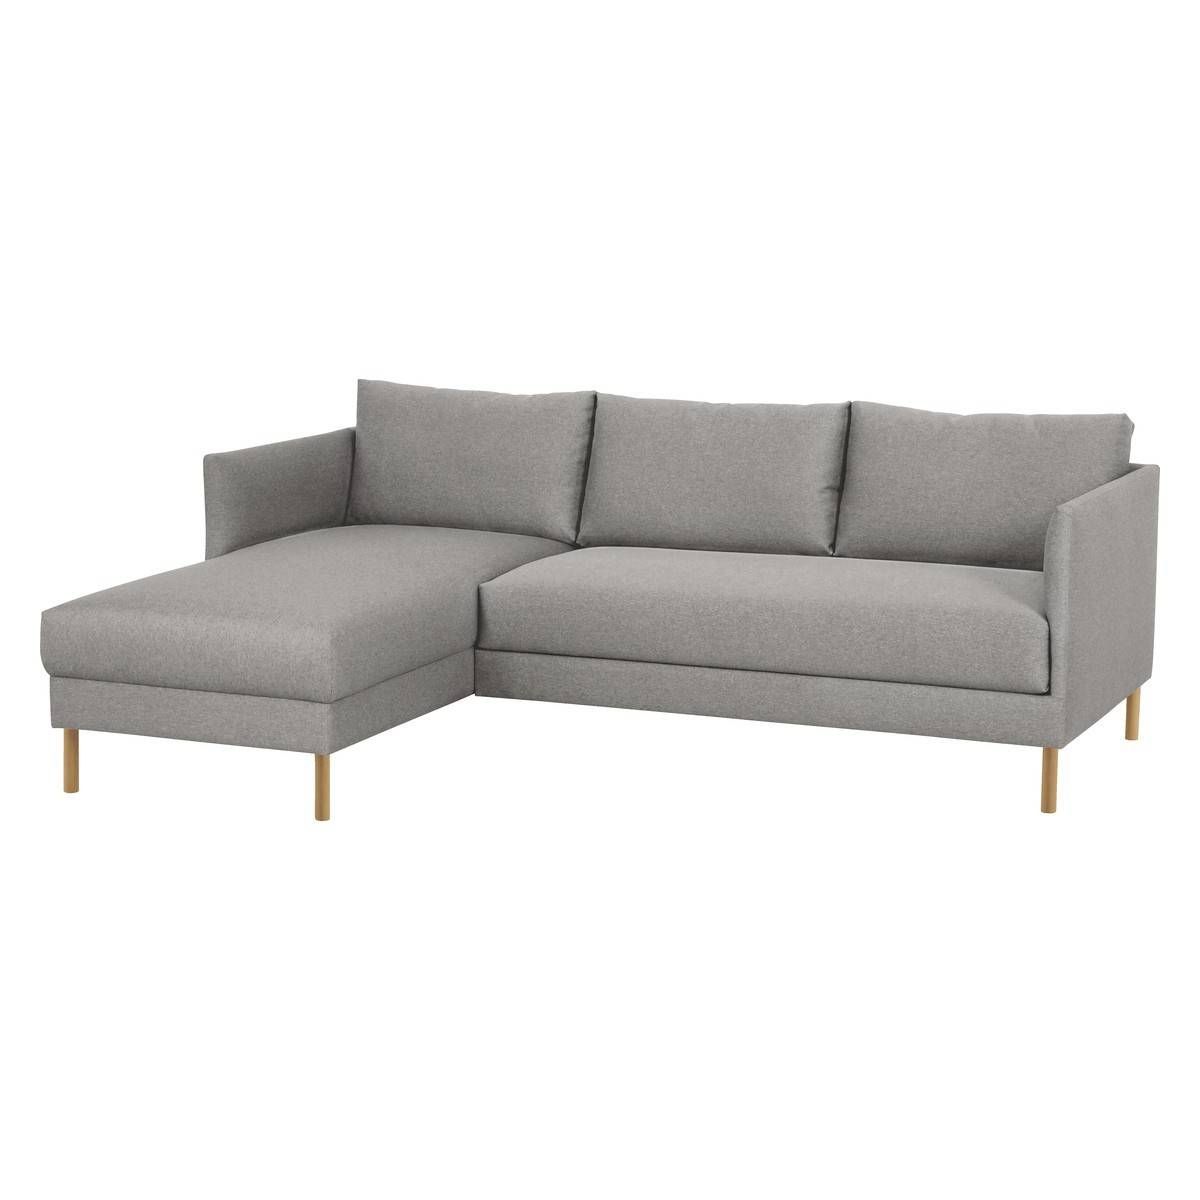 Hyde Grey Fabric Left Arm Chaise Sofa, Wooden Legs | Buy Now At Within Wood Legs Sofas (View 21 of 30)